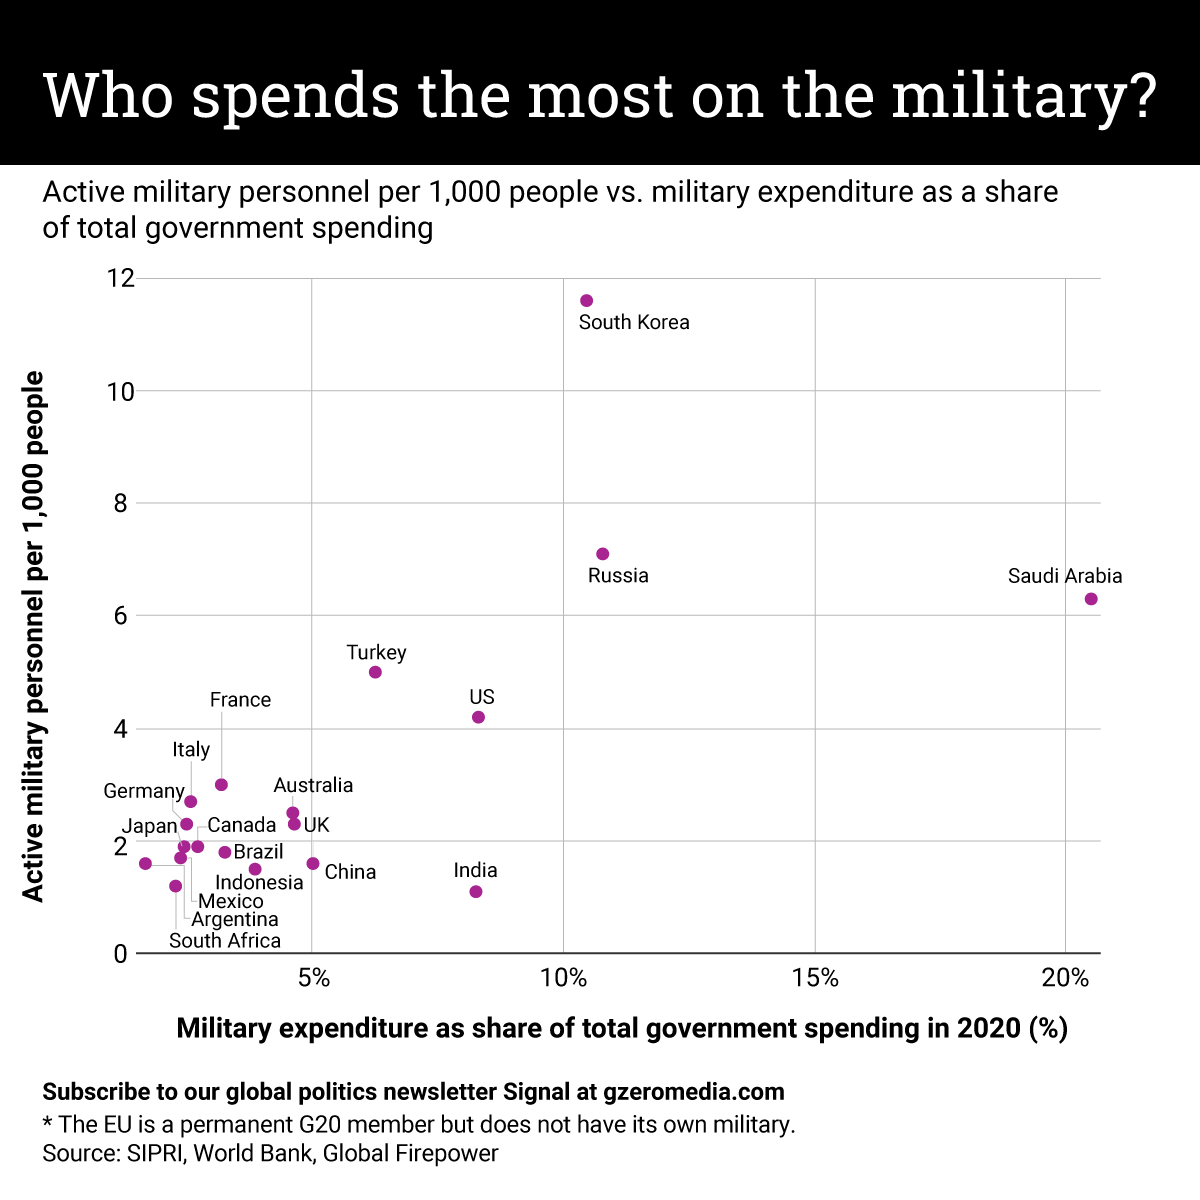 The Graphic Truth: Who spends the most on the military?